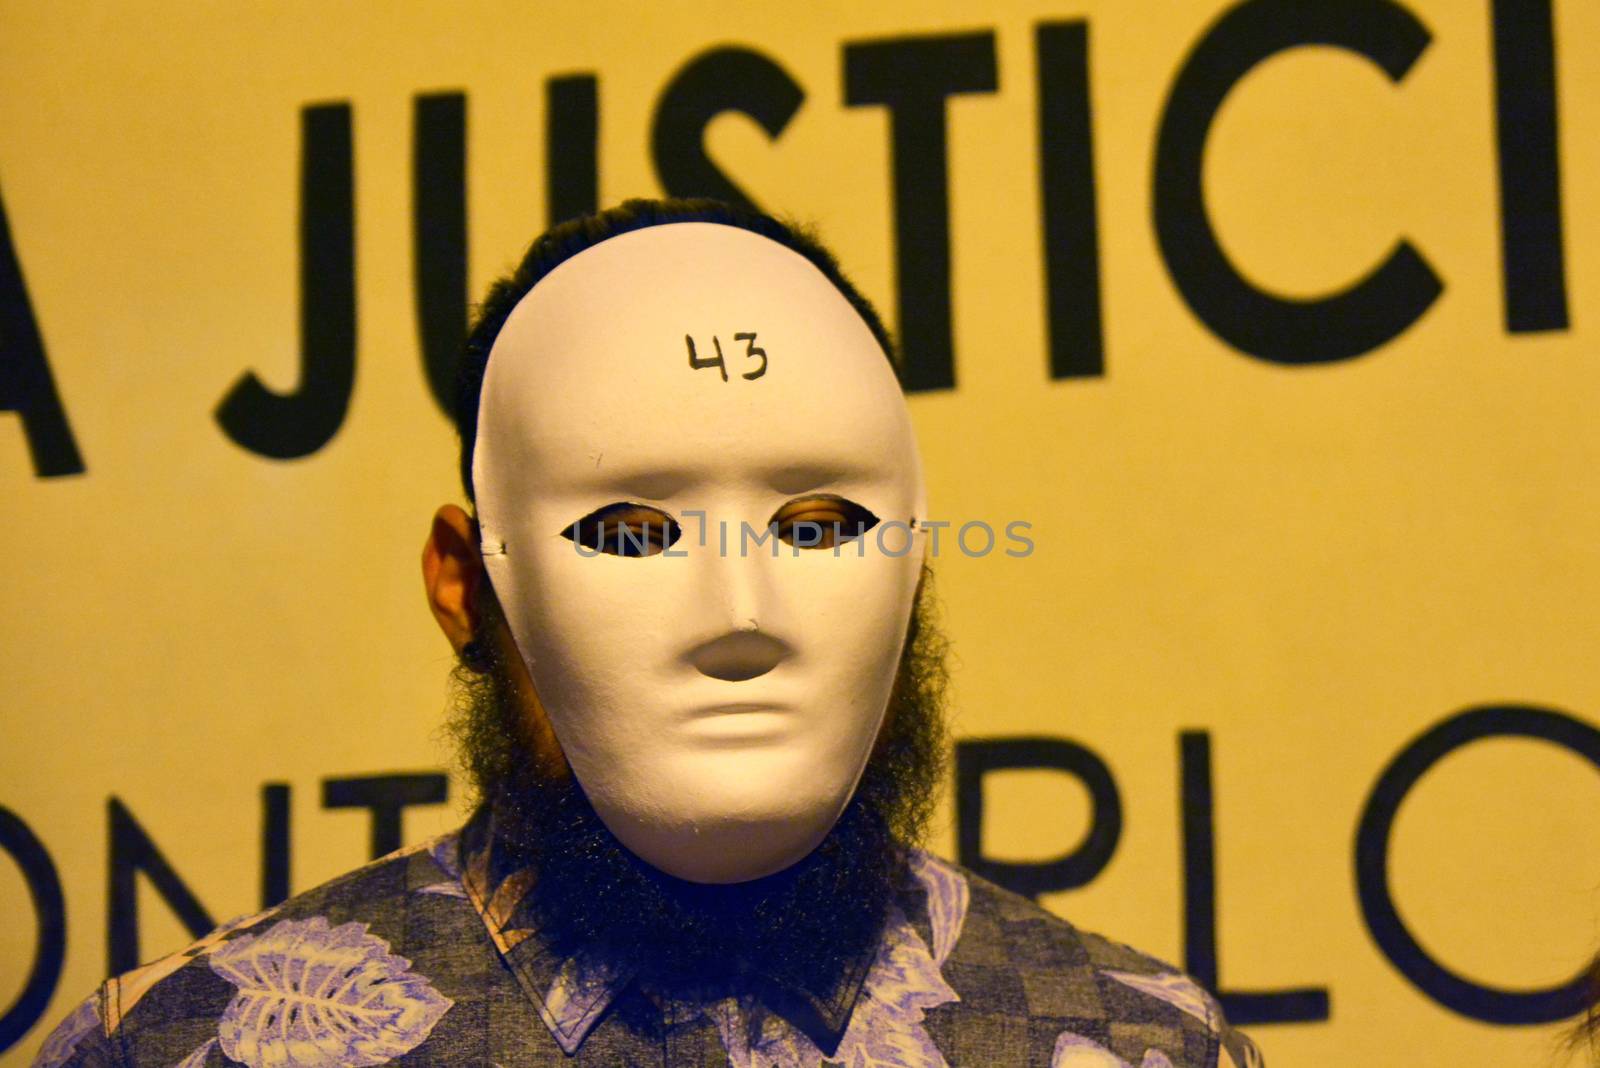 SPAIN, Madrid: A protester wearing a white mask attends a rally outside the Embassy of Mexico in Madrid, Spain on September 25, 2015, to remember the 46 missing Mexican students who disappeared in Iguala, Mexico on September 26 last year. The students who attended Ayotzinapa Rural Teachers' College went missing with the circumstances surrounding their disappearance still unclear